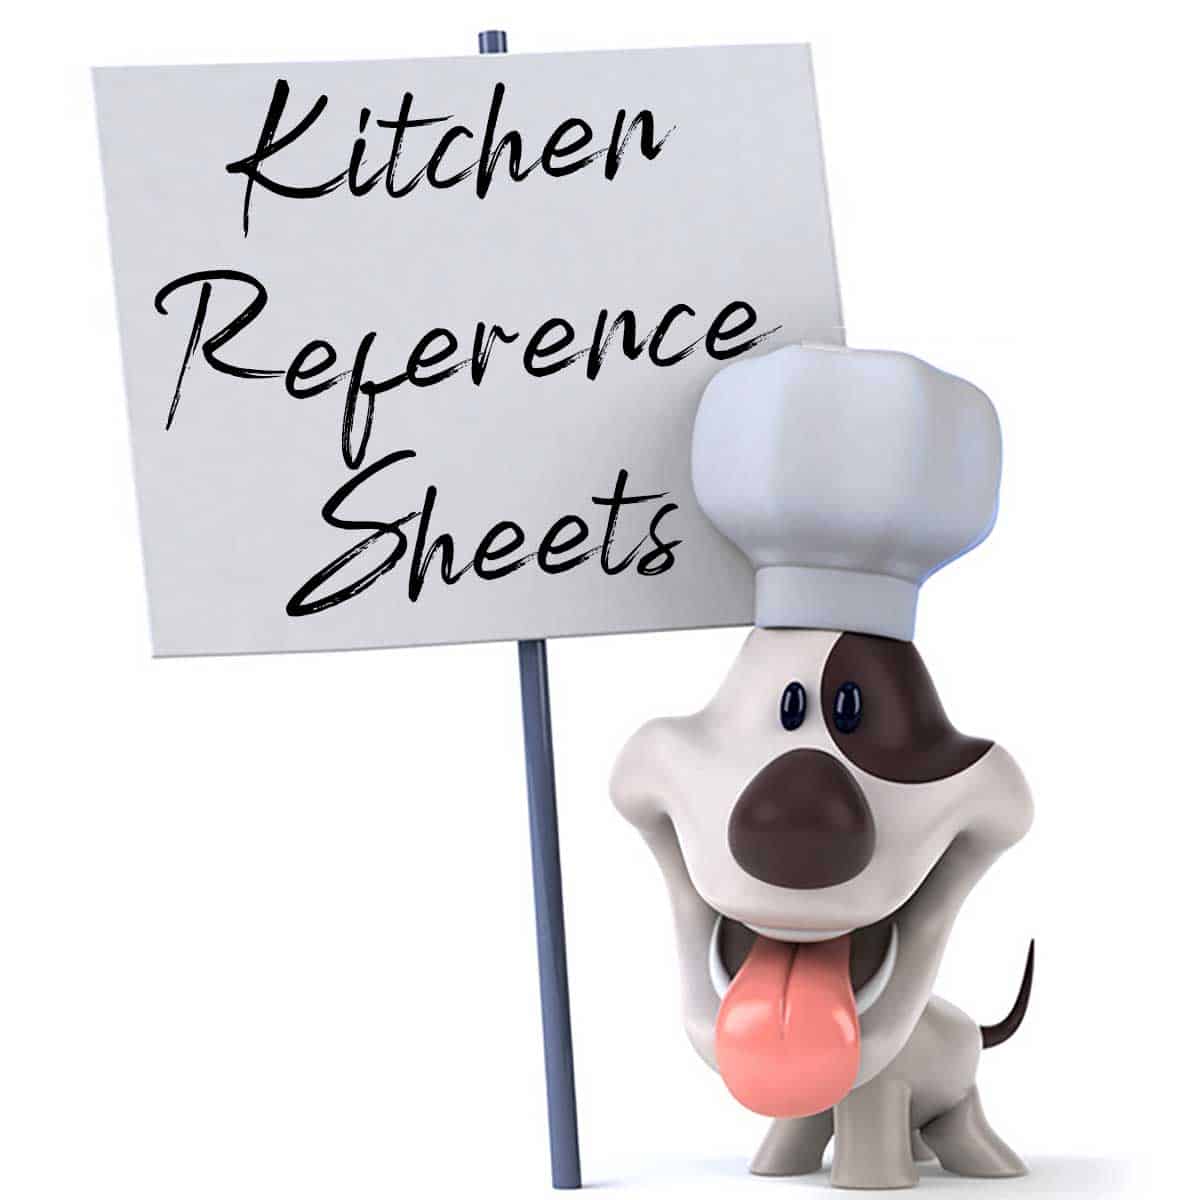 Kitchen Reference Sheets - 101 Cooking For Two